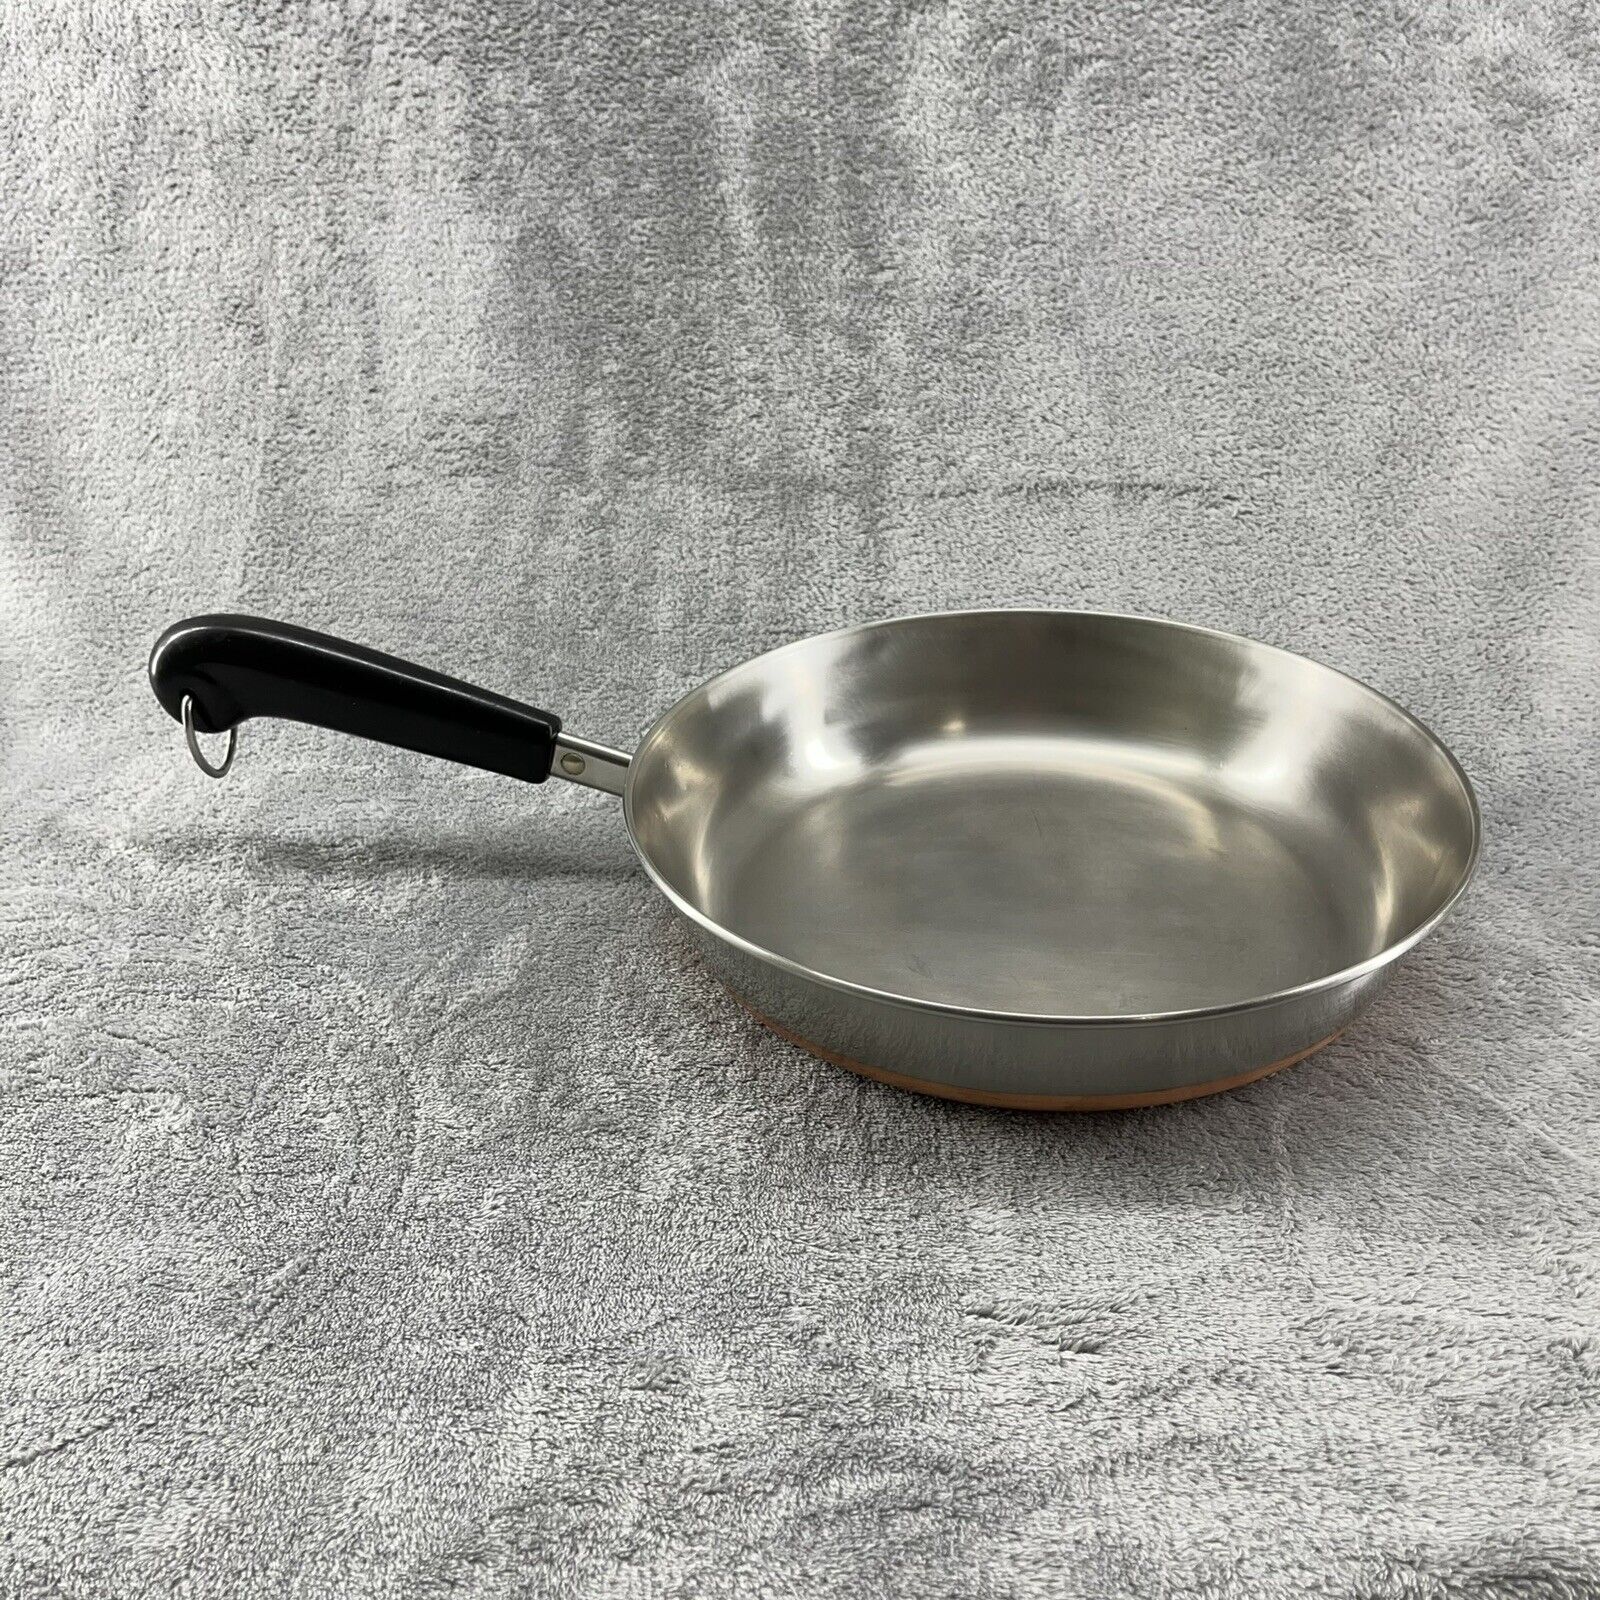 Vintage Revere Ware Skillet Frying Pan 10 In 85 Copper Bottom Clinton USA No Lid